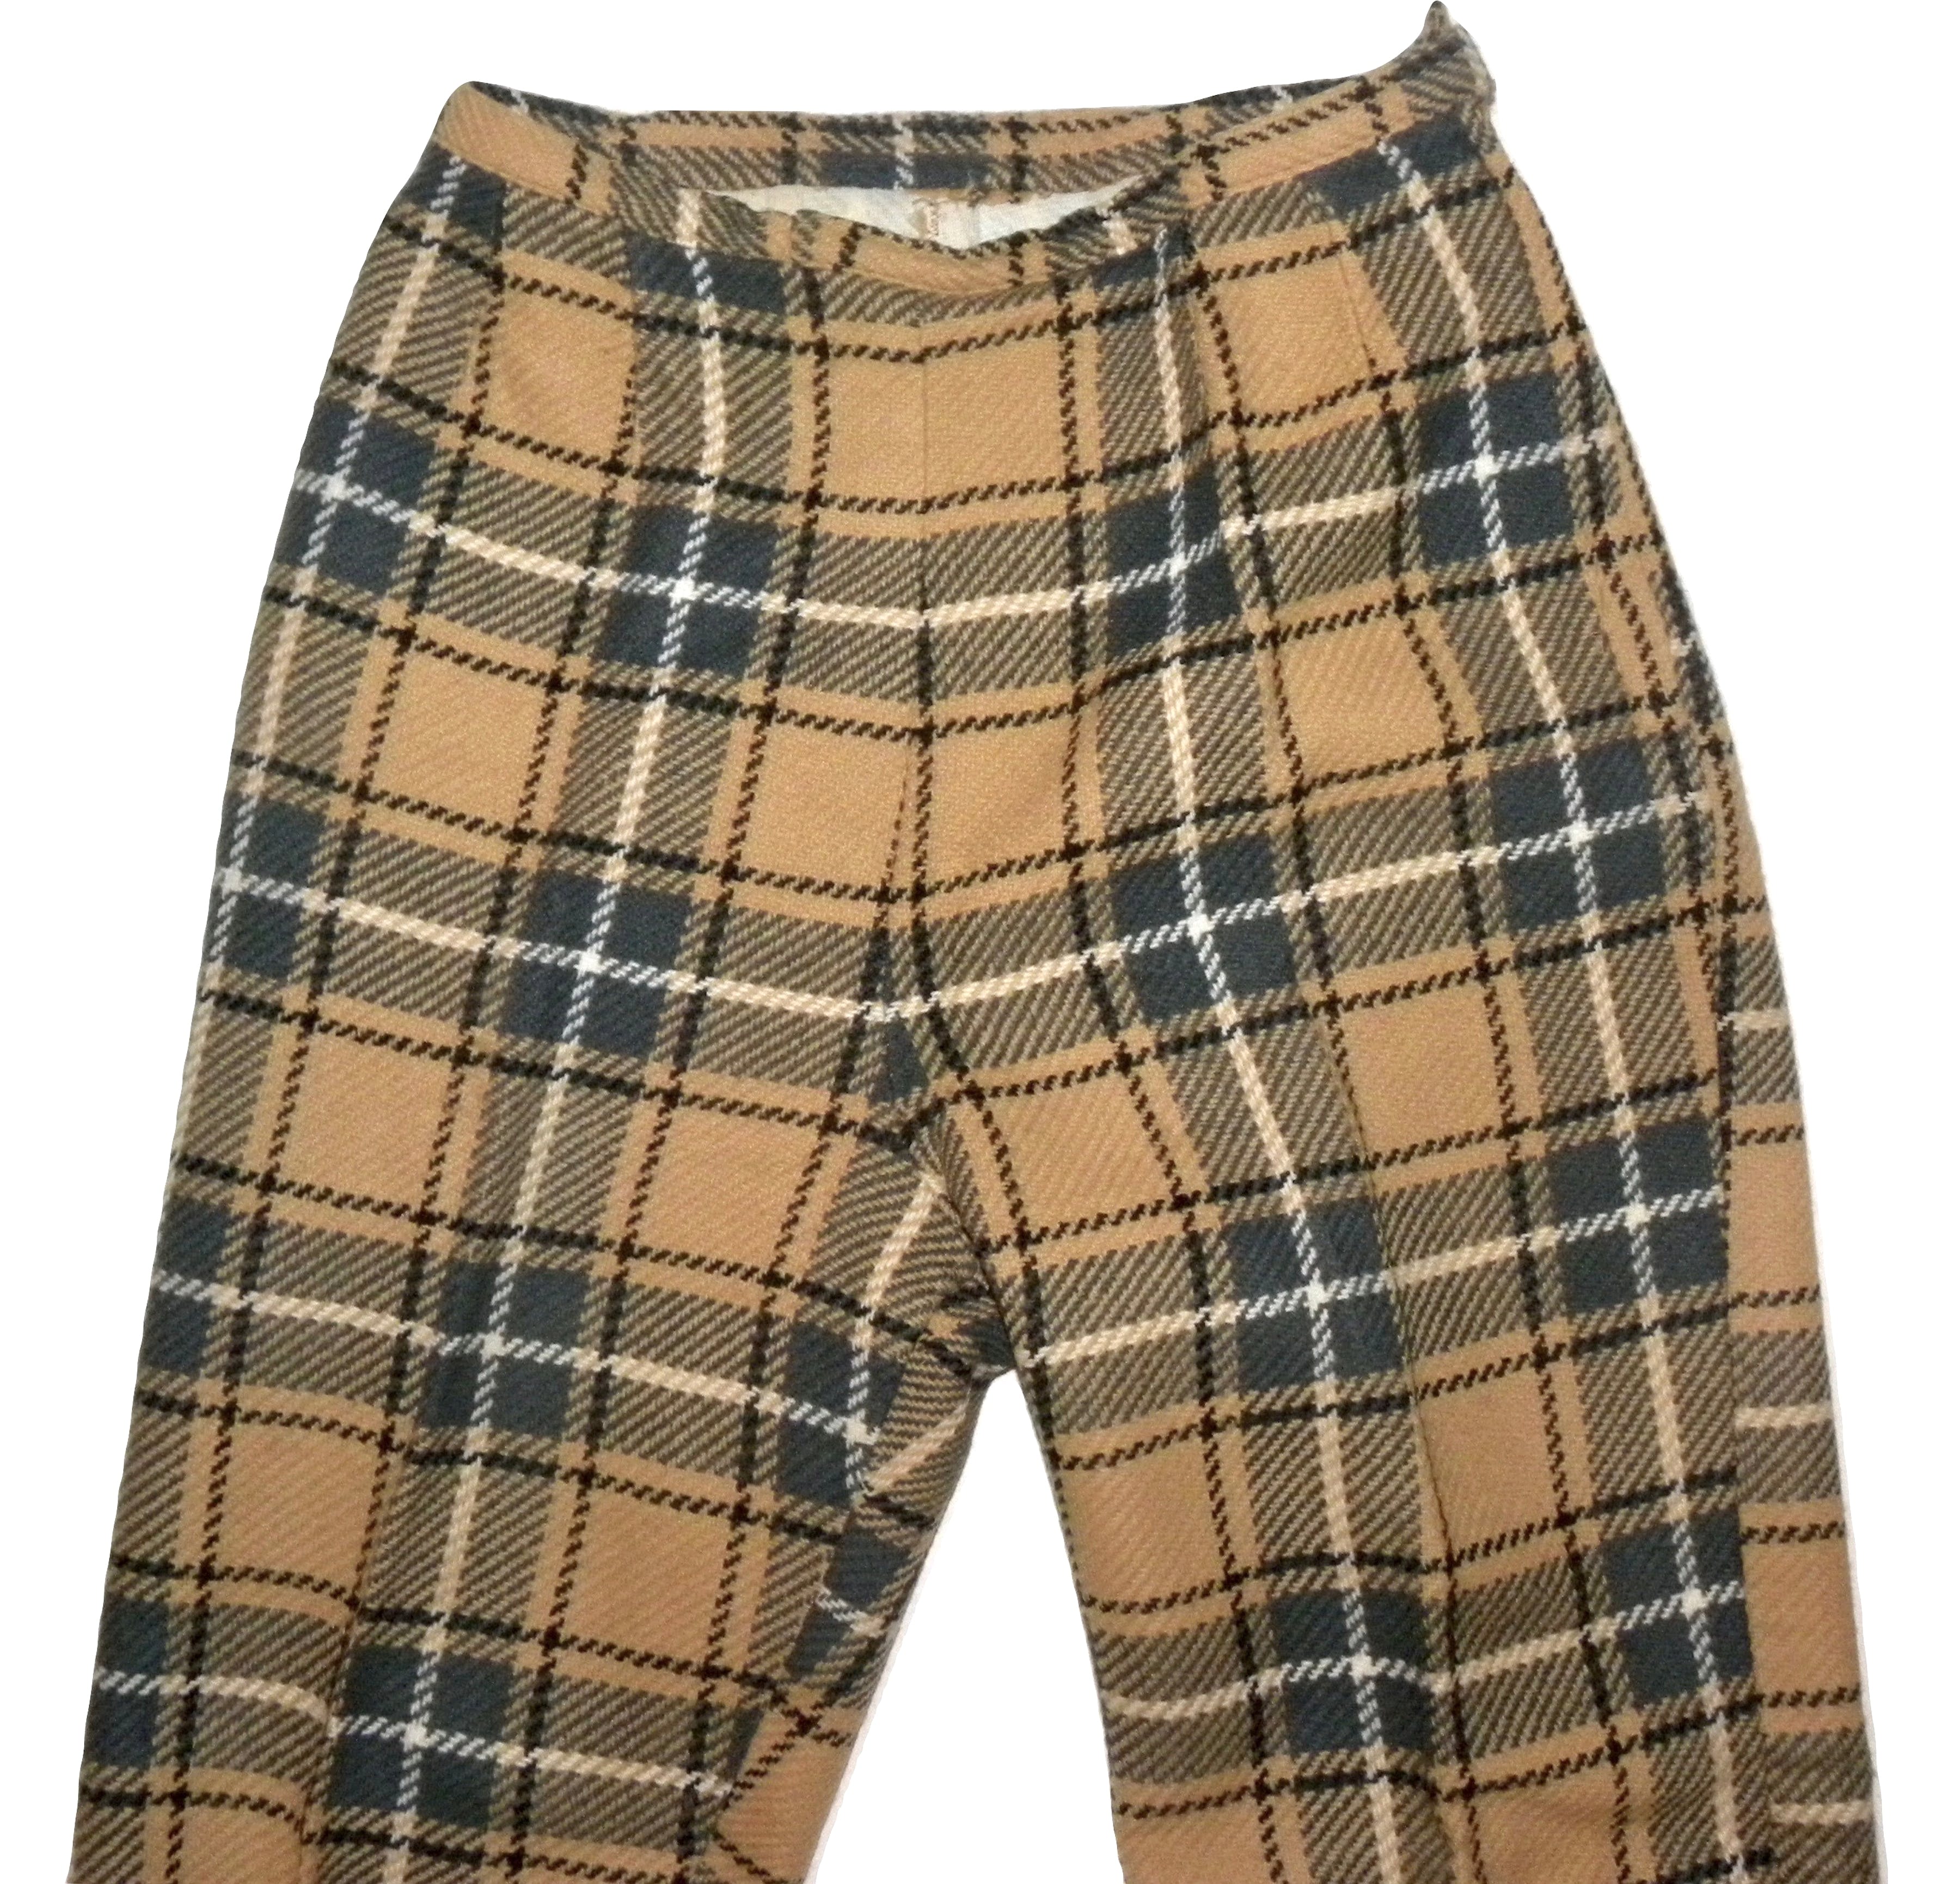 Vintage 60's High Waisted Beige and Gray Plaid Mod Pants | Shop THRILLING